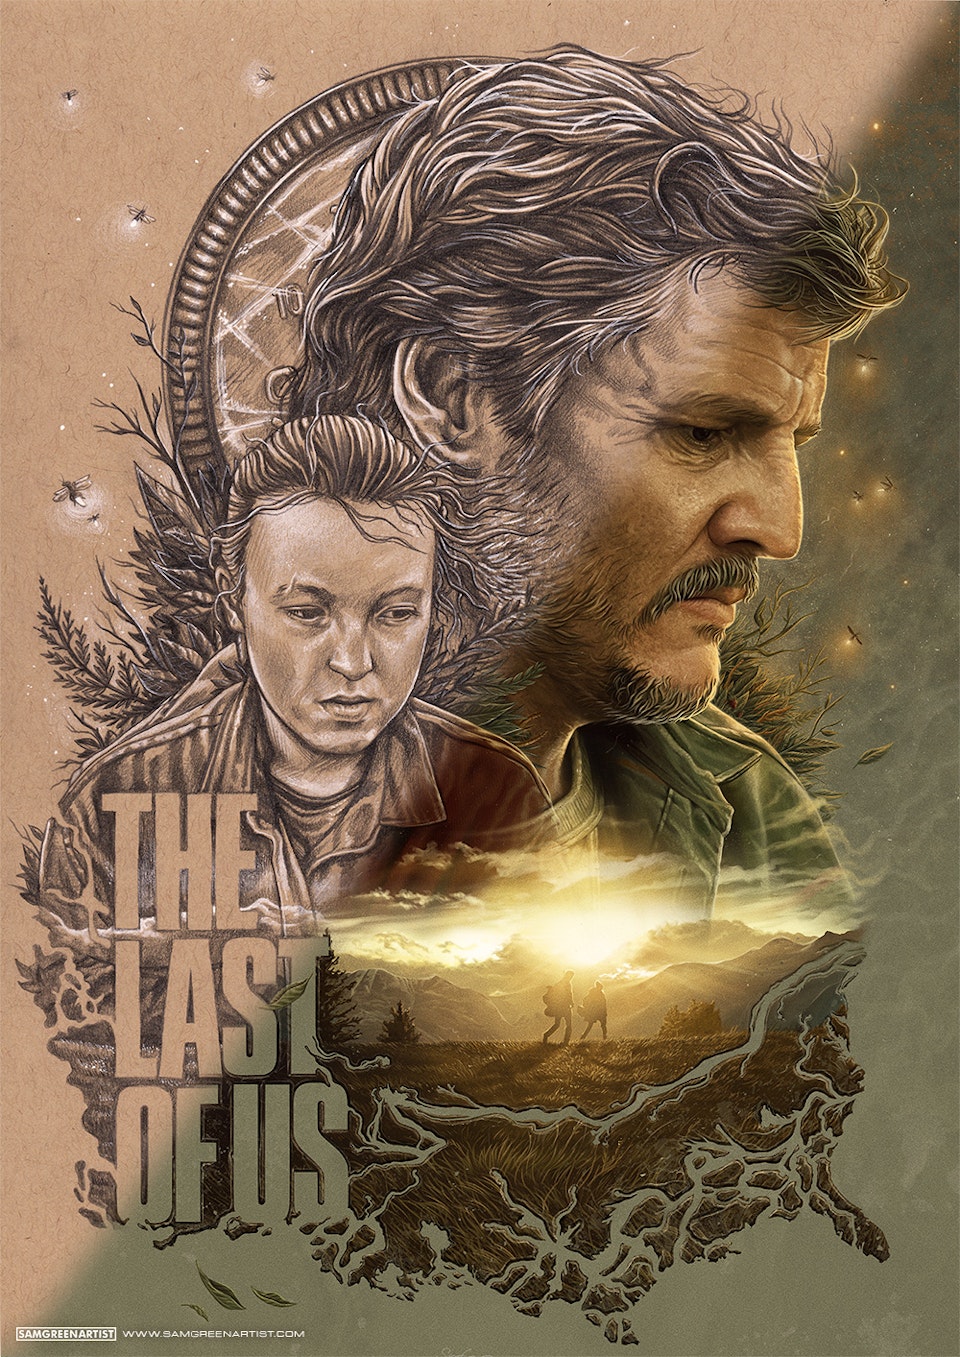 The Last of Us (HBO Series) - The Last of Us - From pencil to digital 🌿